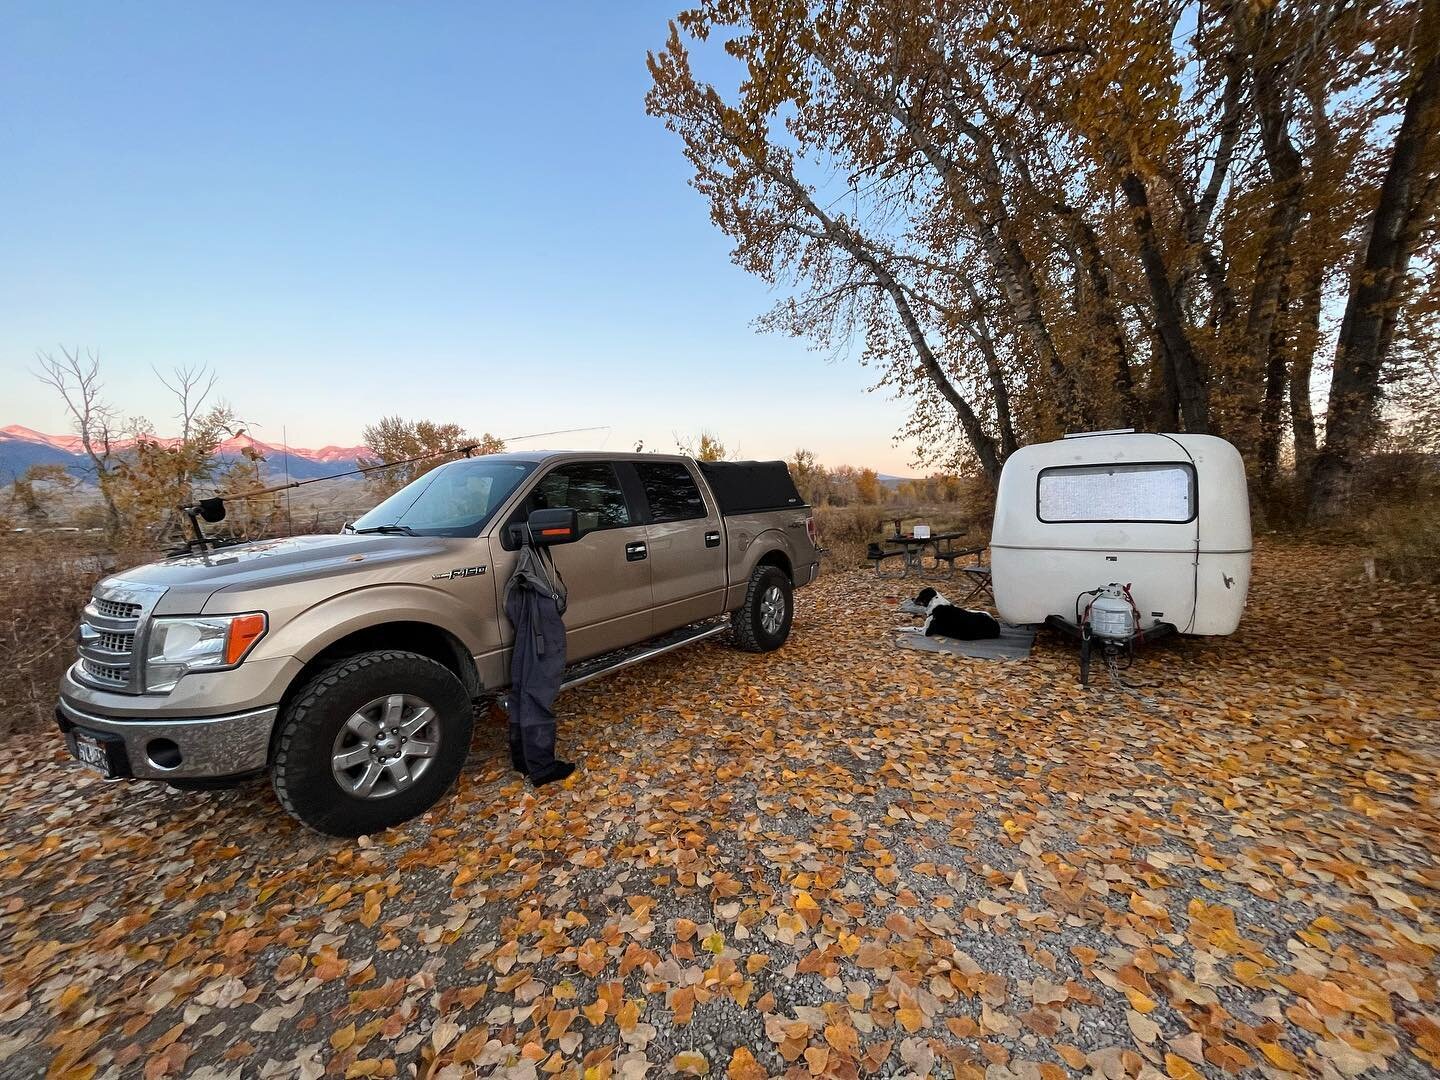 Glorious fall camping and the first steelhead trip for Rufus. Like most that come from trout fishing, the lack of action bored the hell out of him.

Luckily he found some nice sticks to chew, a few rabbits to chase, and as many treats as he wanted. #